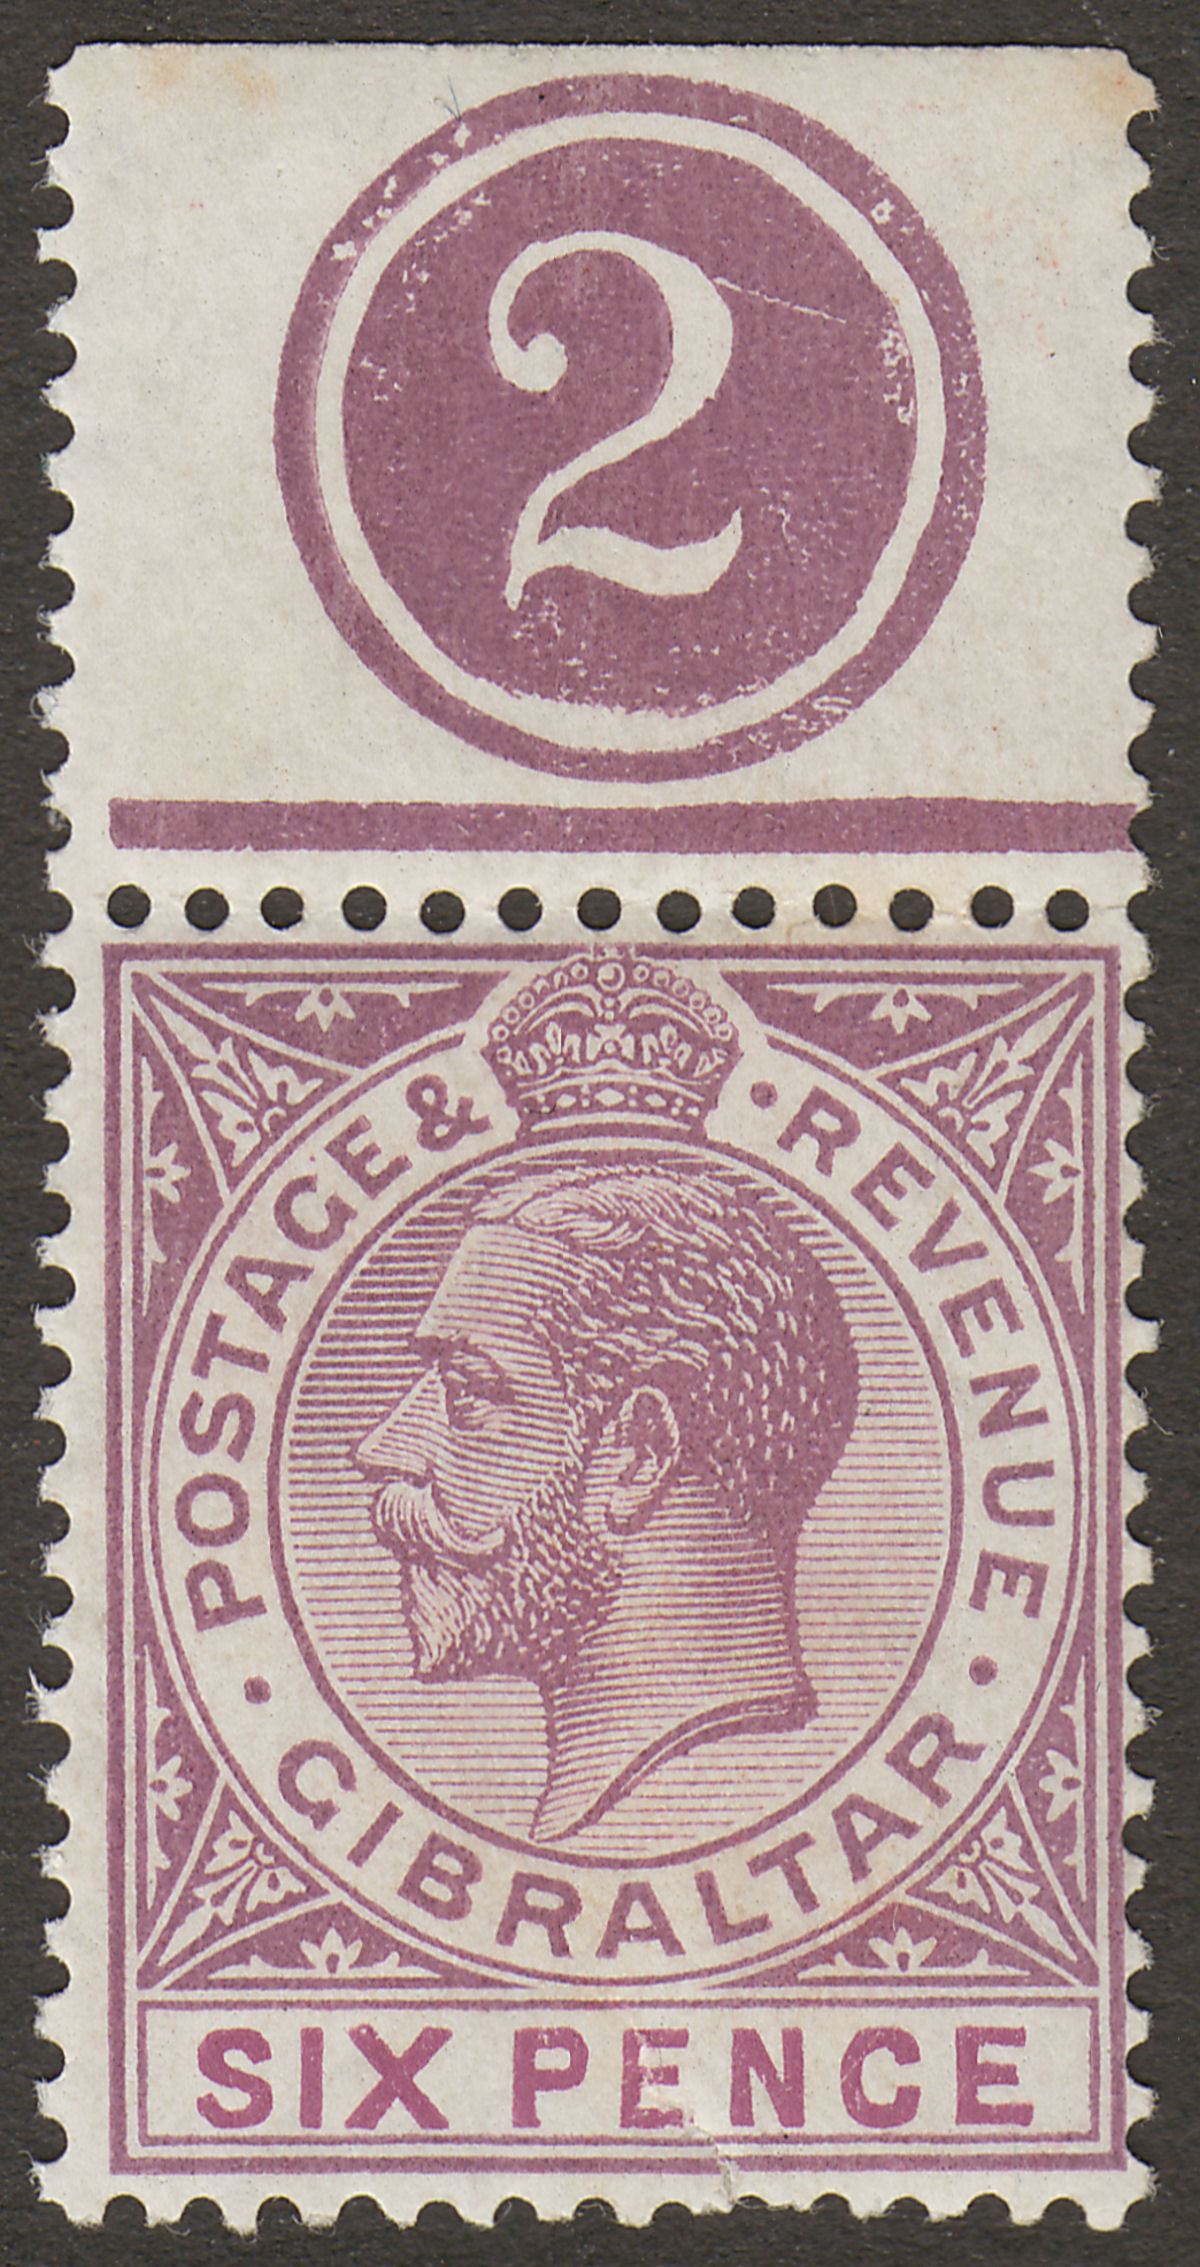 Gibraltar 1923 KGV 6d Dull Purple and Mauve Plate 2 Marginal Mint SG97 with tear